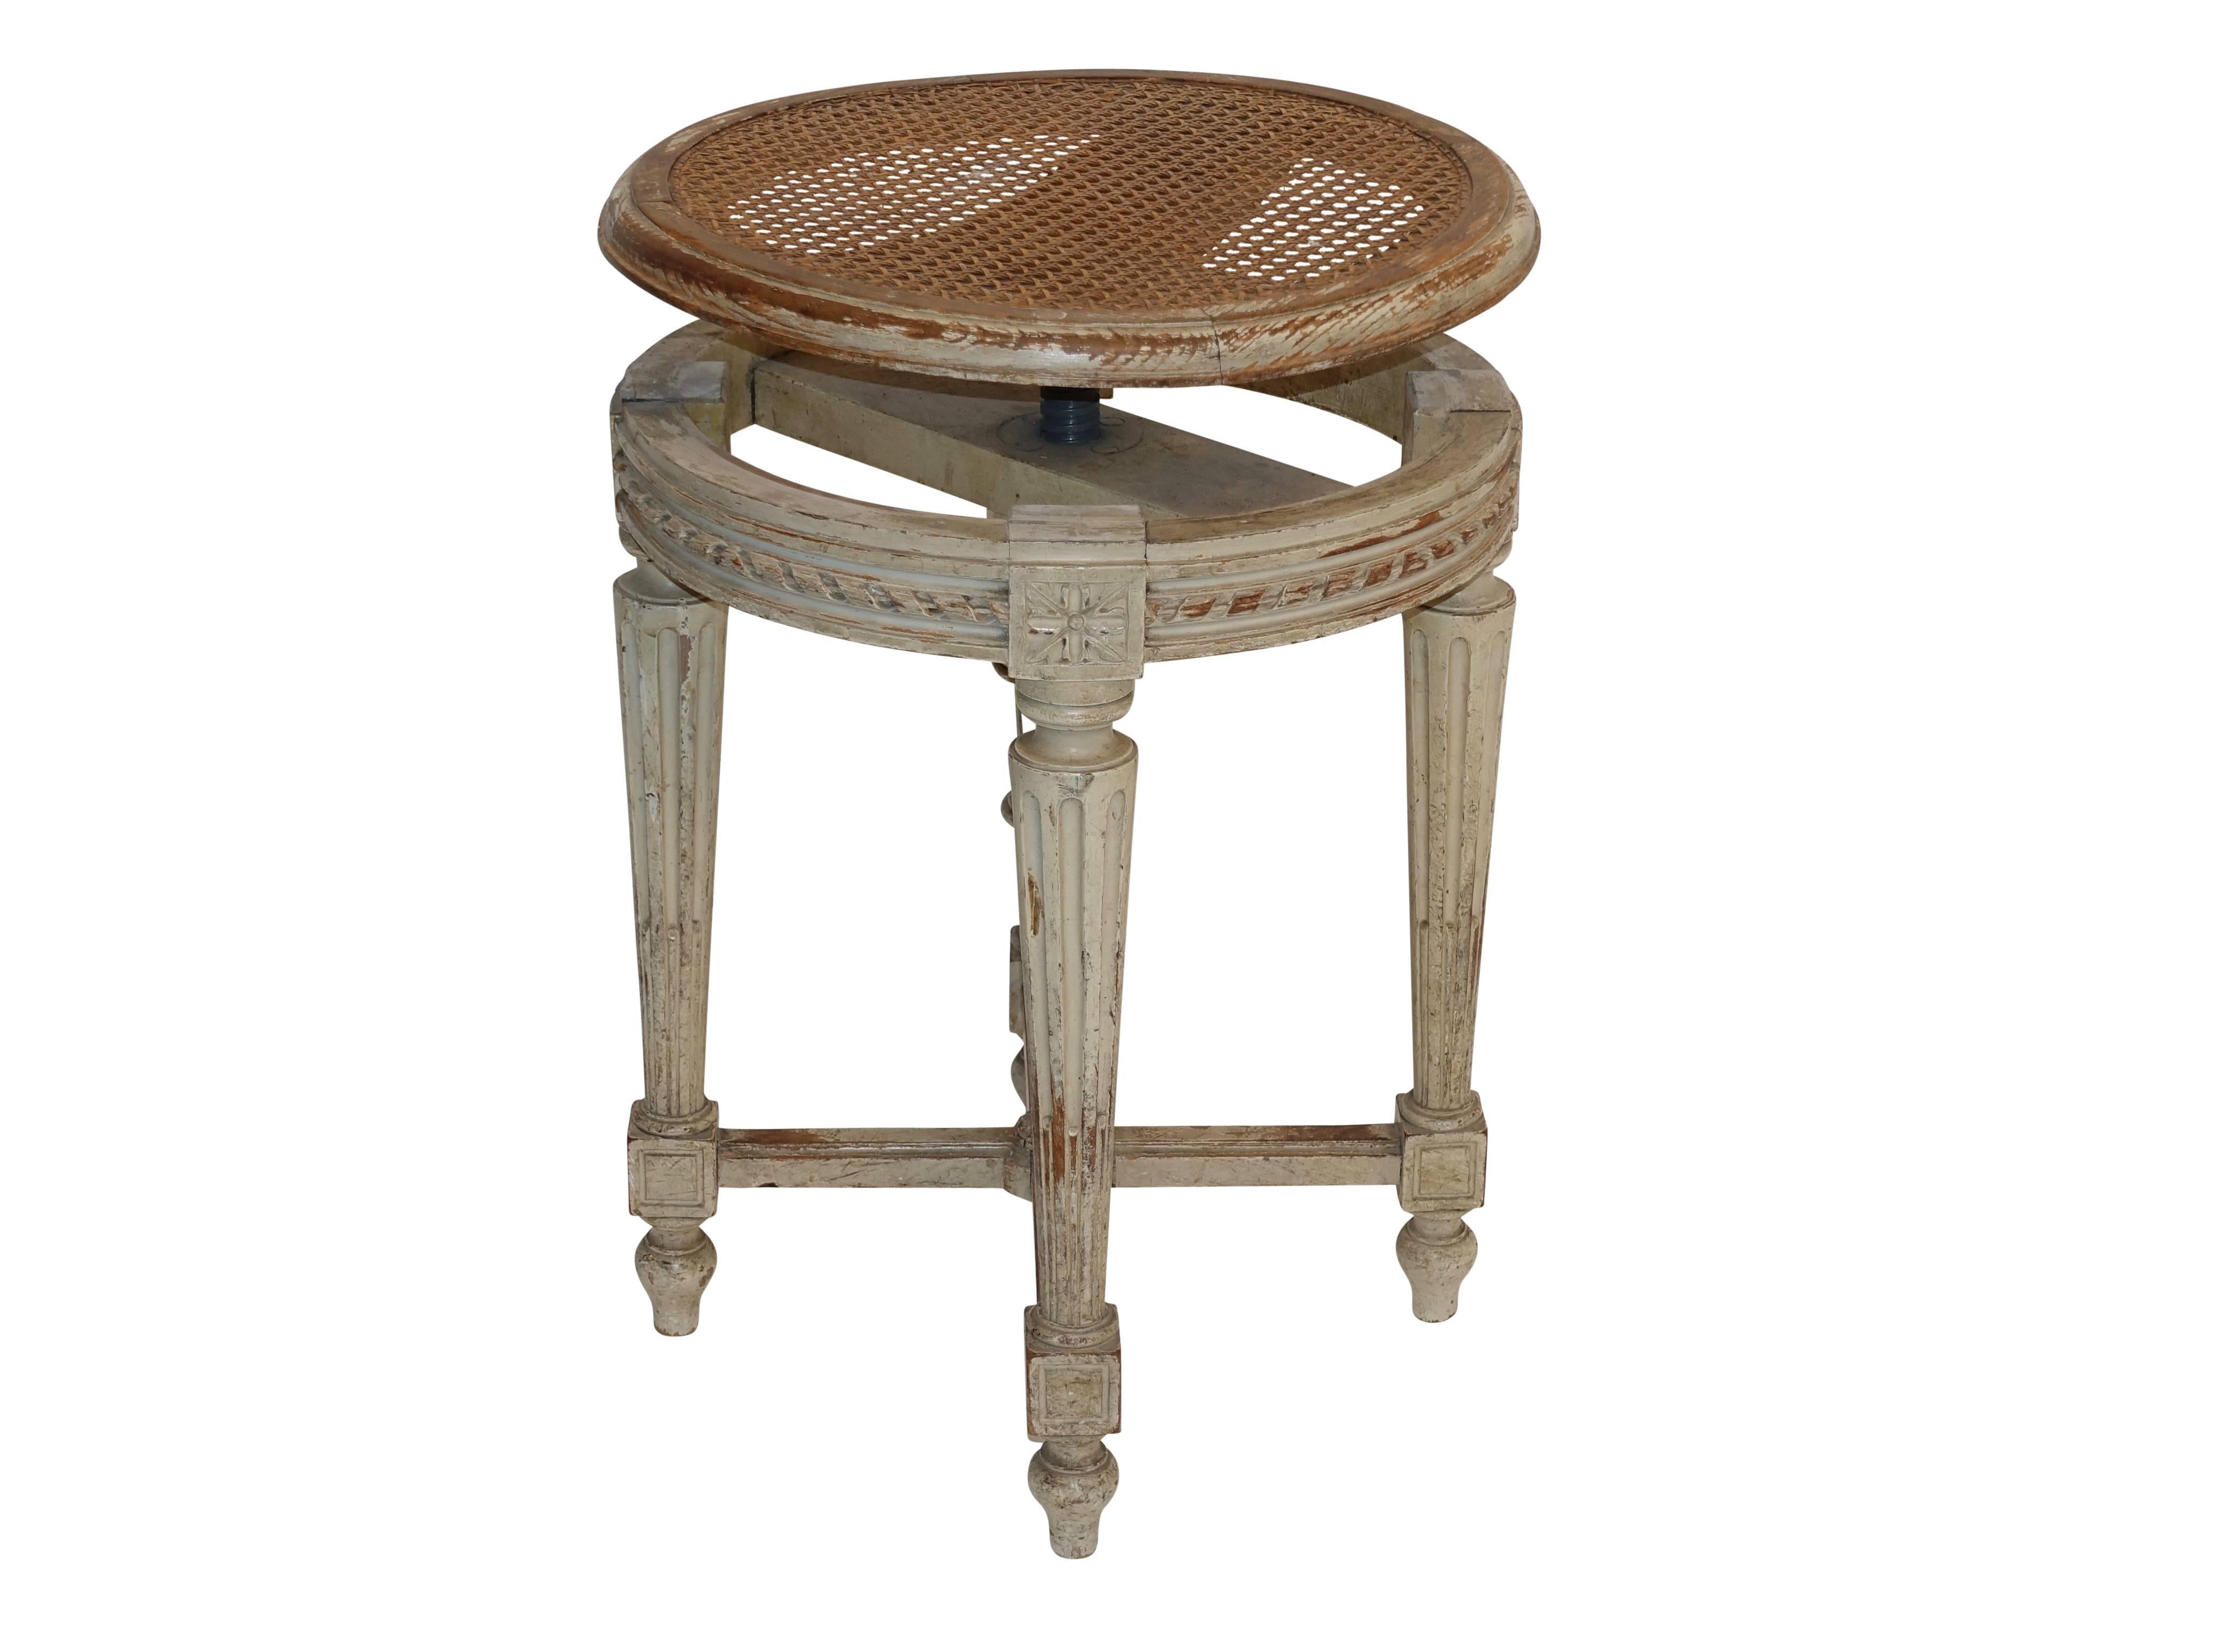 Louis XVI piano stool with original paint and original caned seat. The seat adjusted to its highest point measures 24 inches, France, circa 1880.